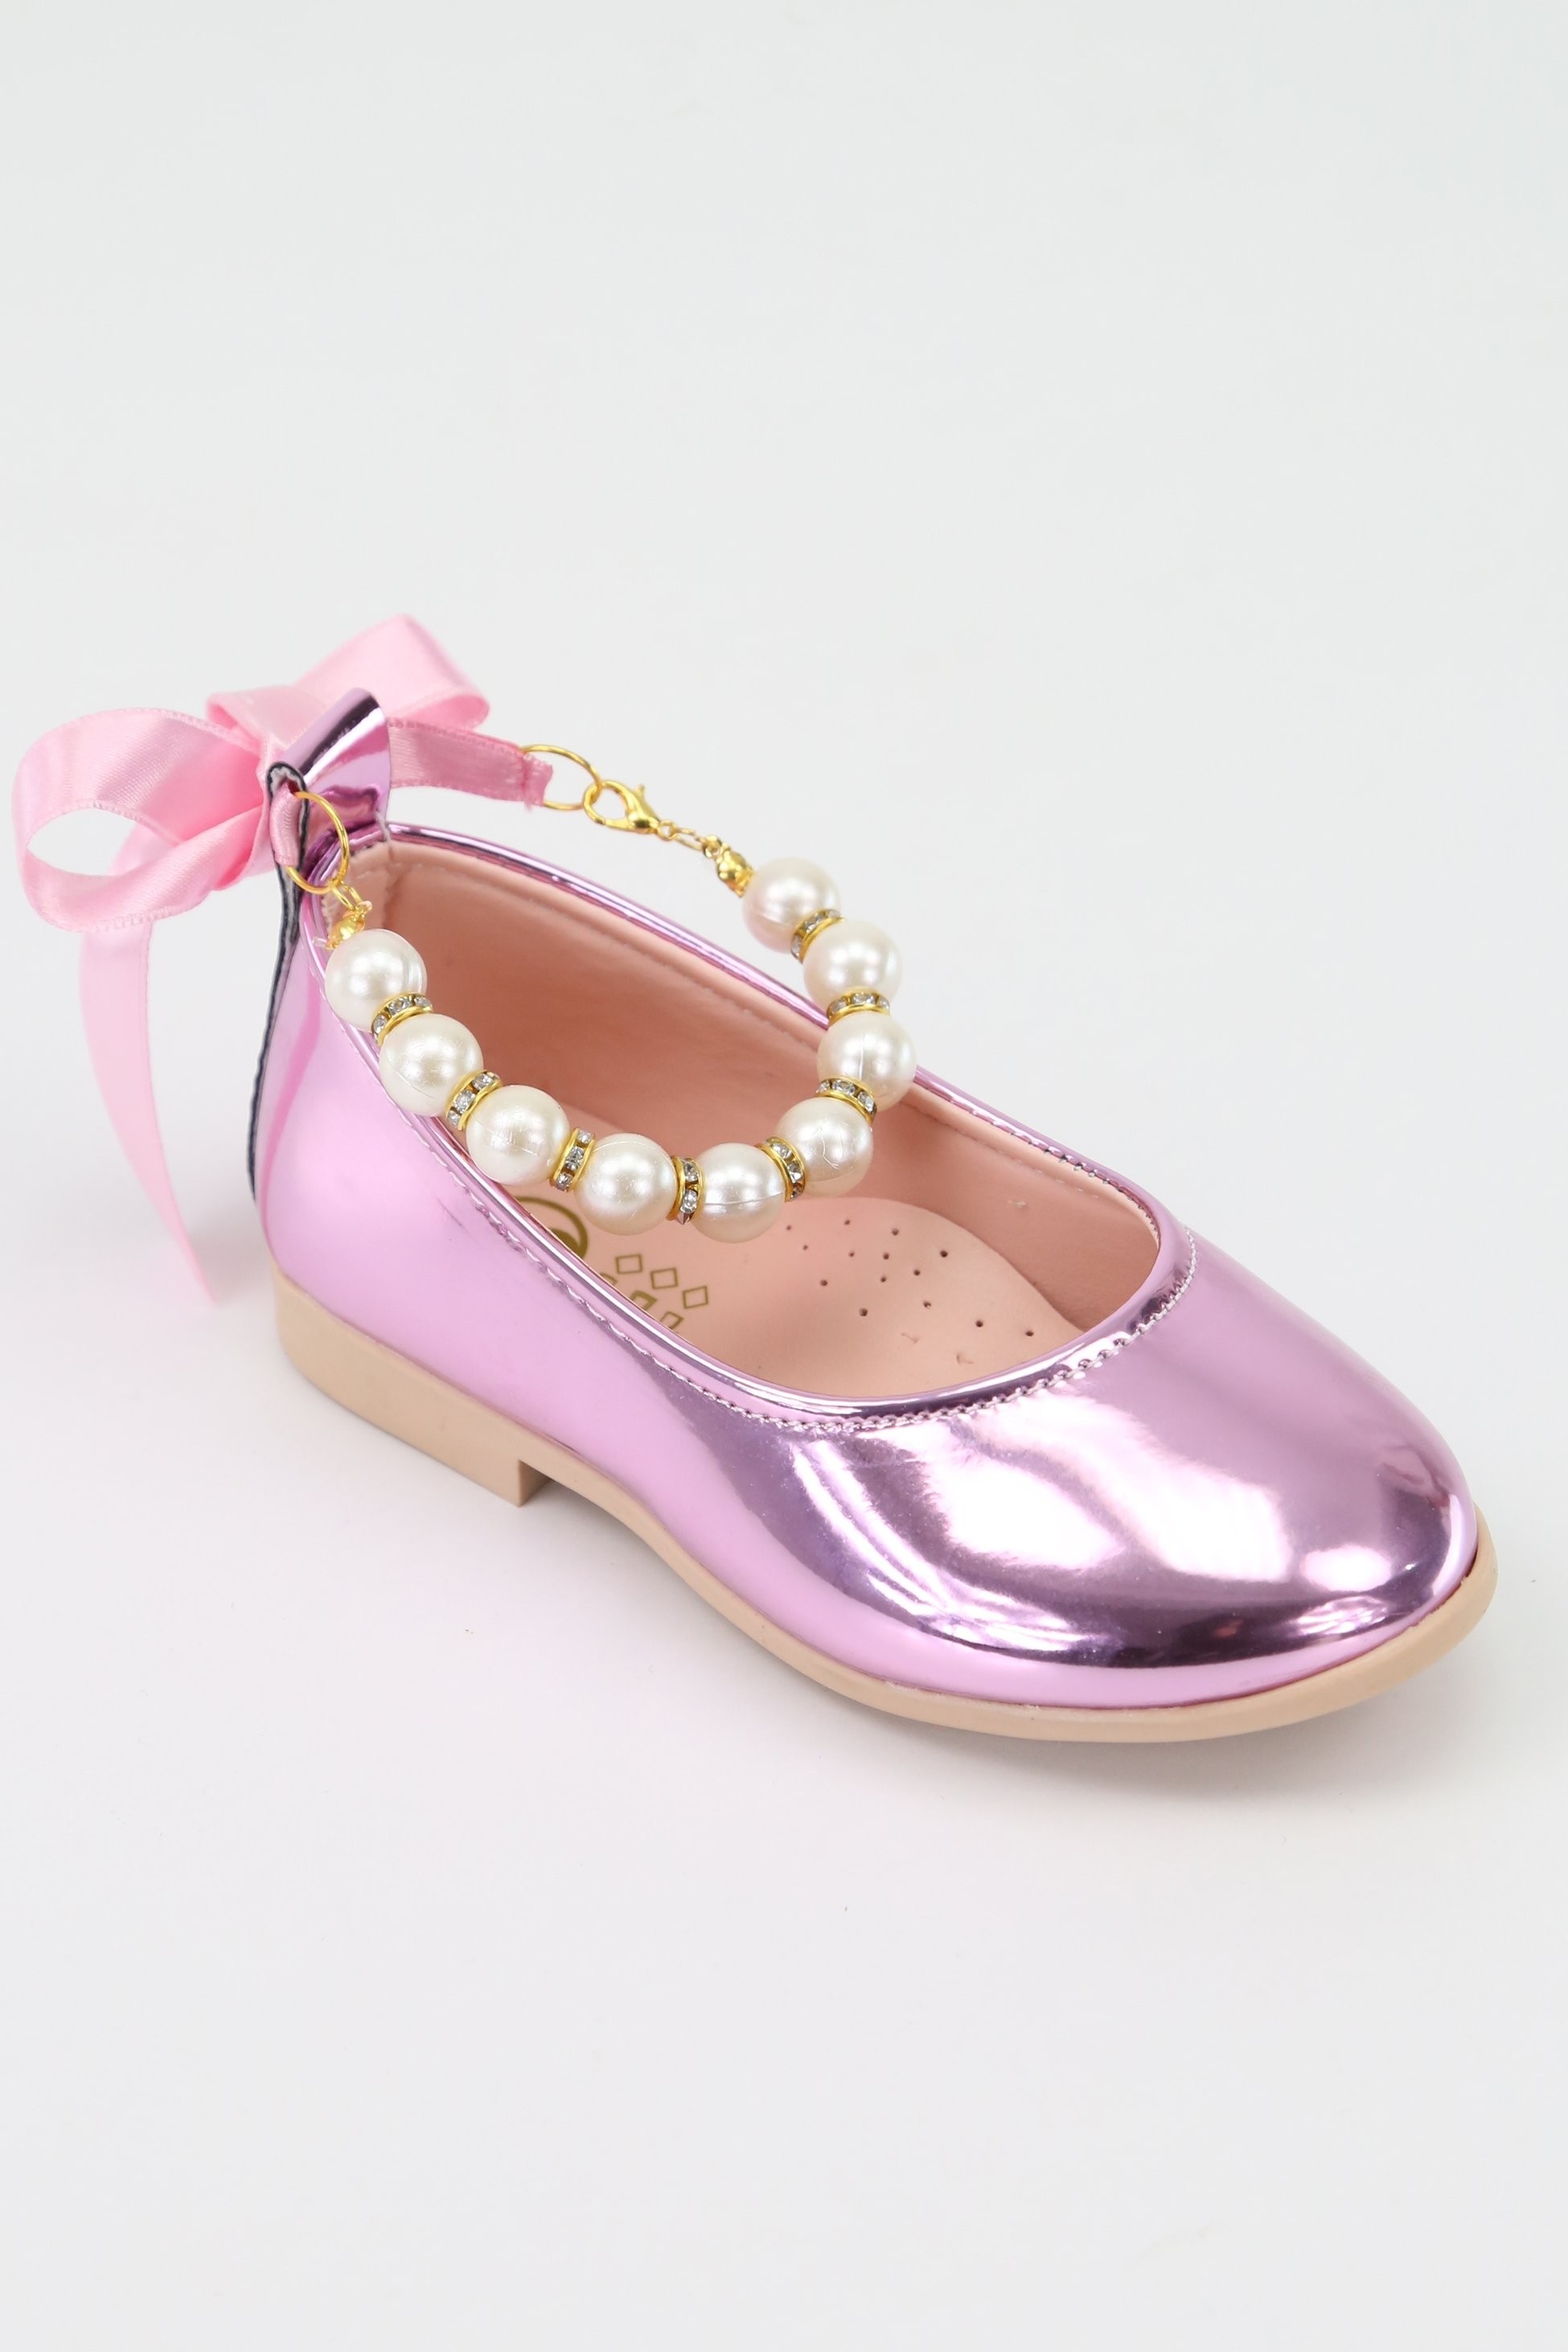 Girls Pearls & Ribbon Slip on Patent Mary Jane Shoes - TEAN - Pink